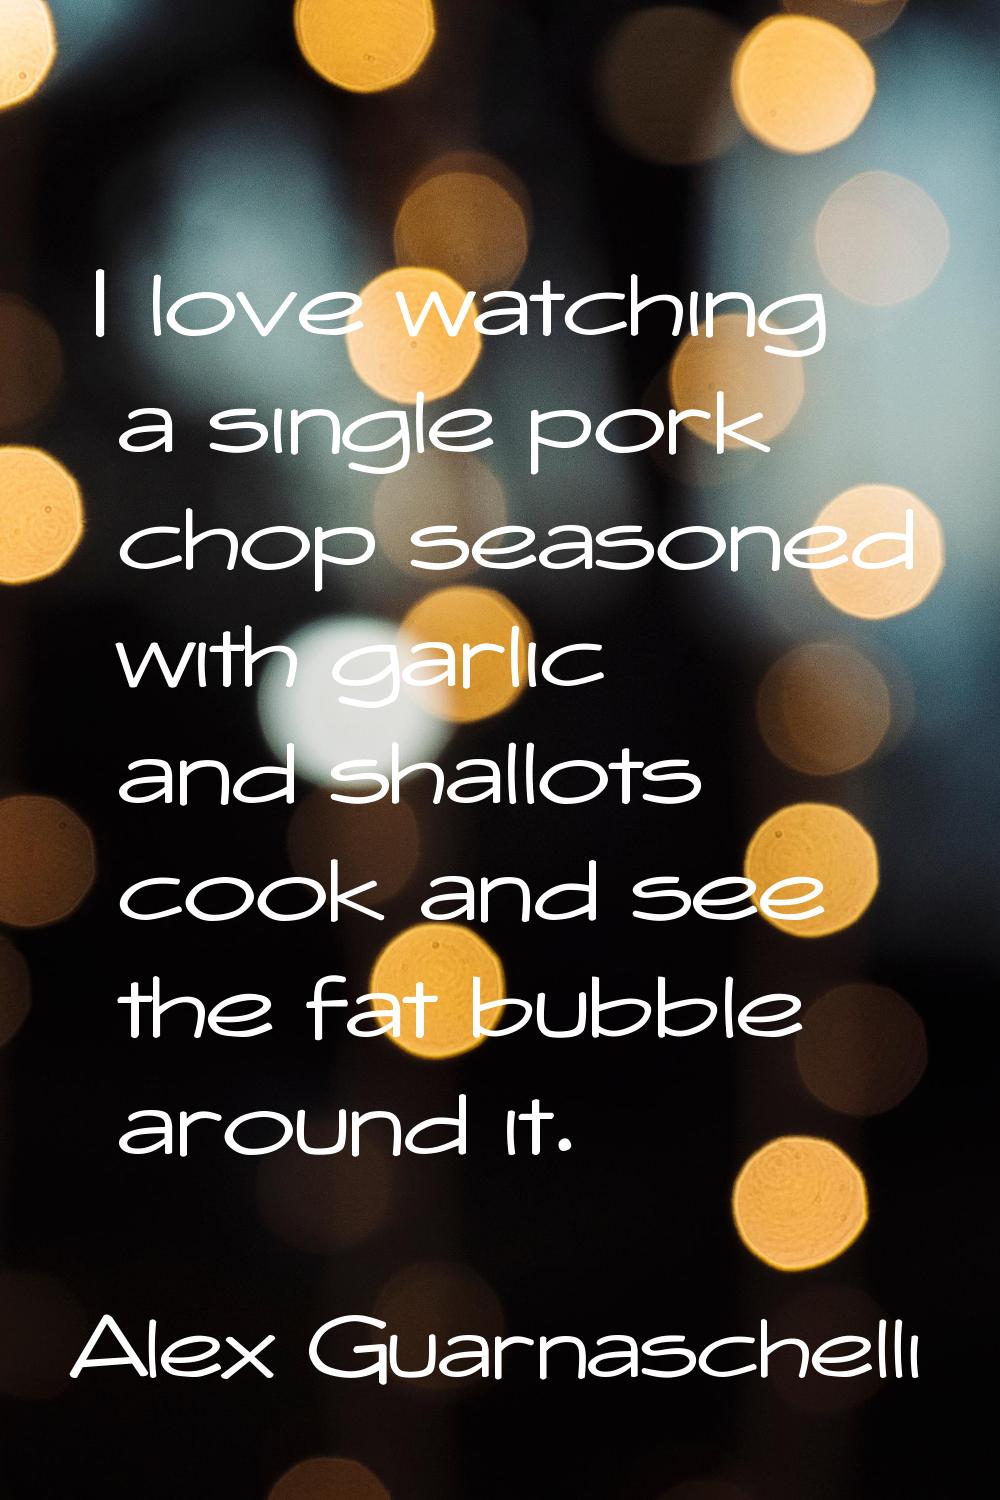 I love watching a single pork chop seasoned with garlic and shallots cook and see the fat bubble ar